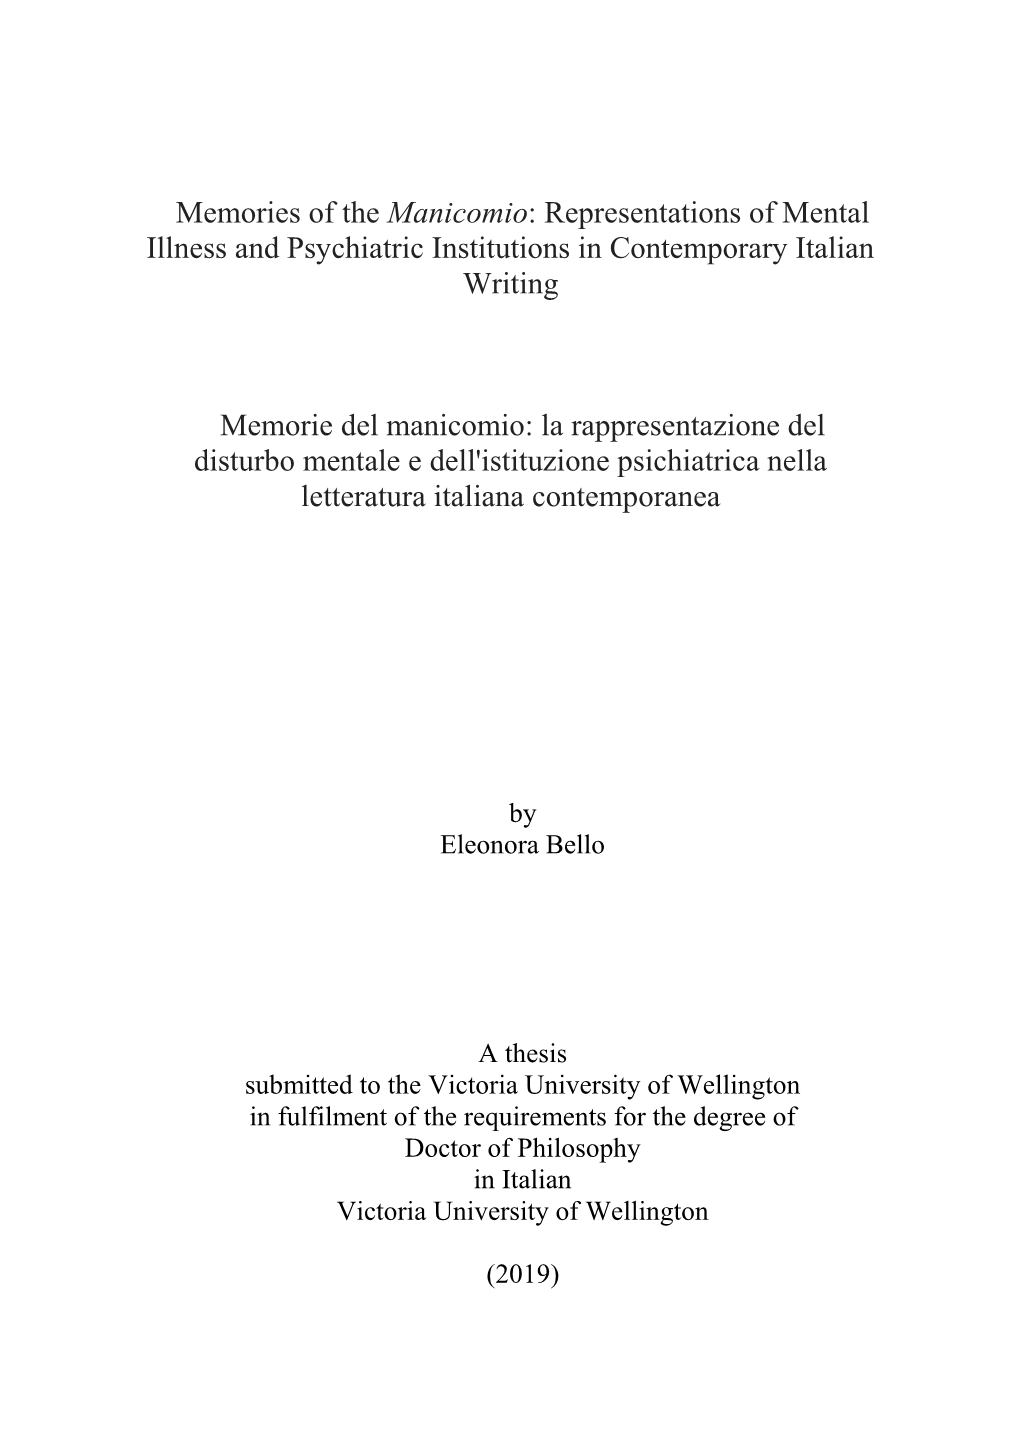 Memories of the Manicomio: Representations of Mental Illness and Psychiatric Institutions in Contemporary Italian Writing